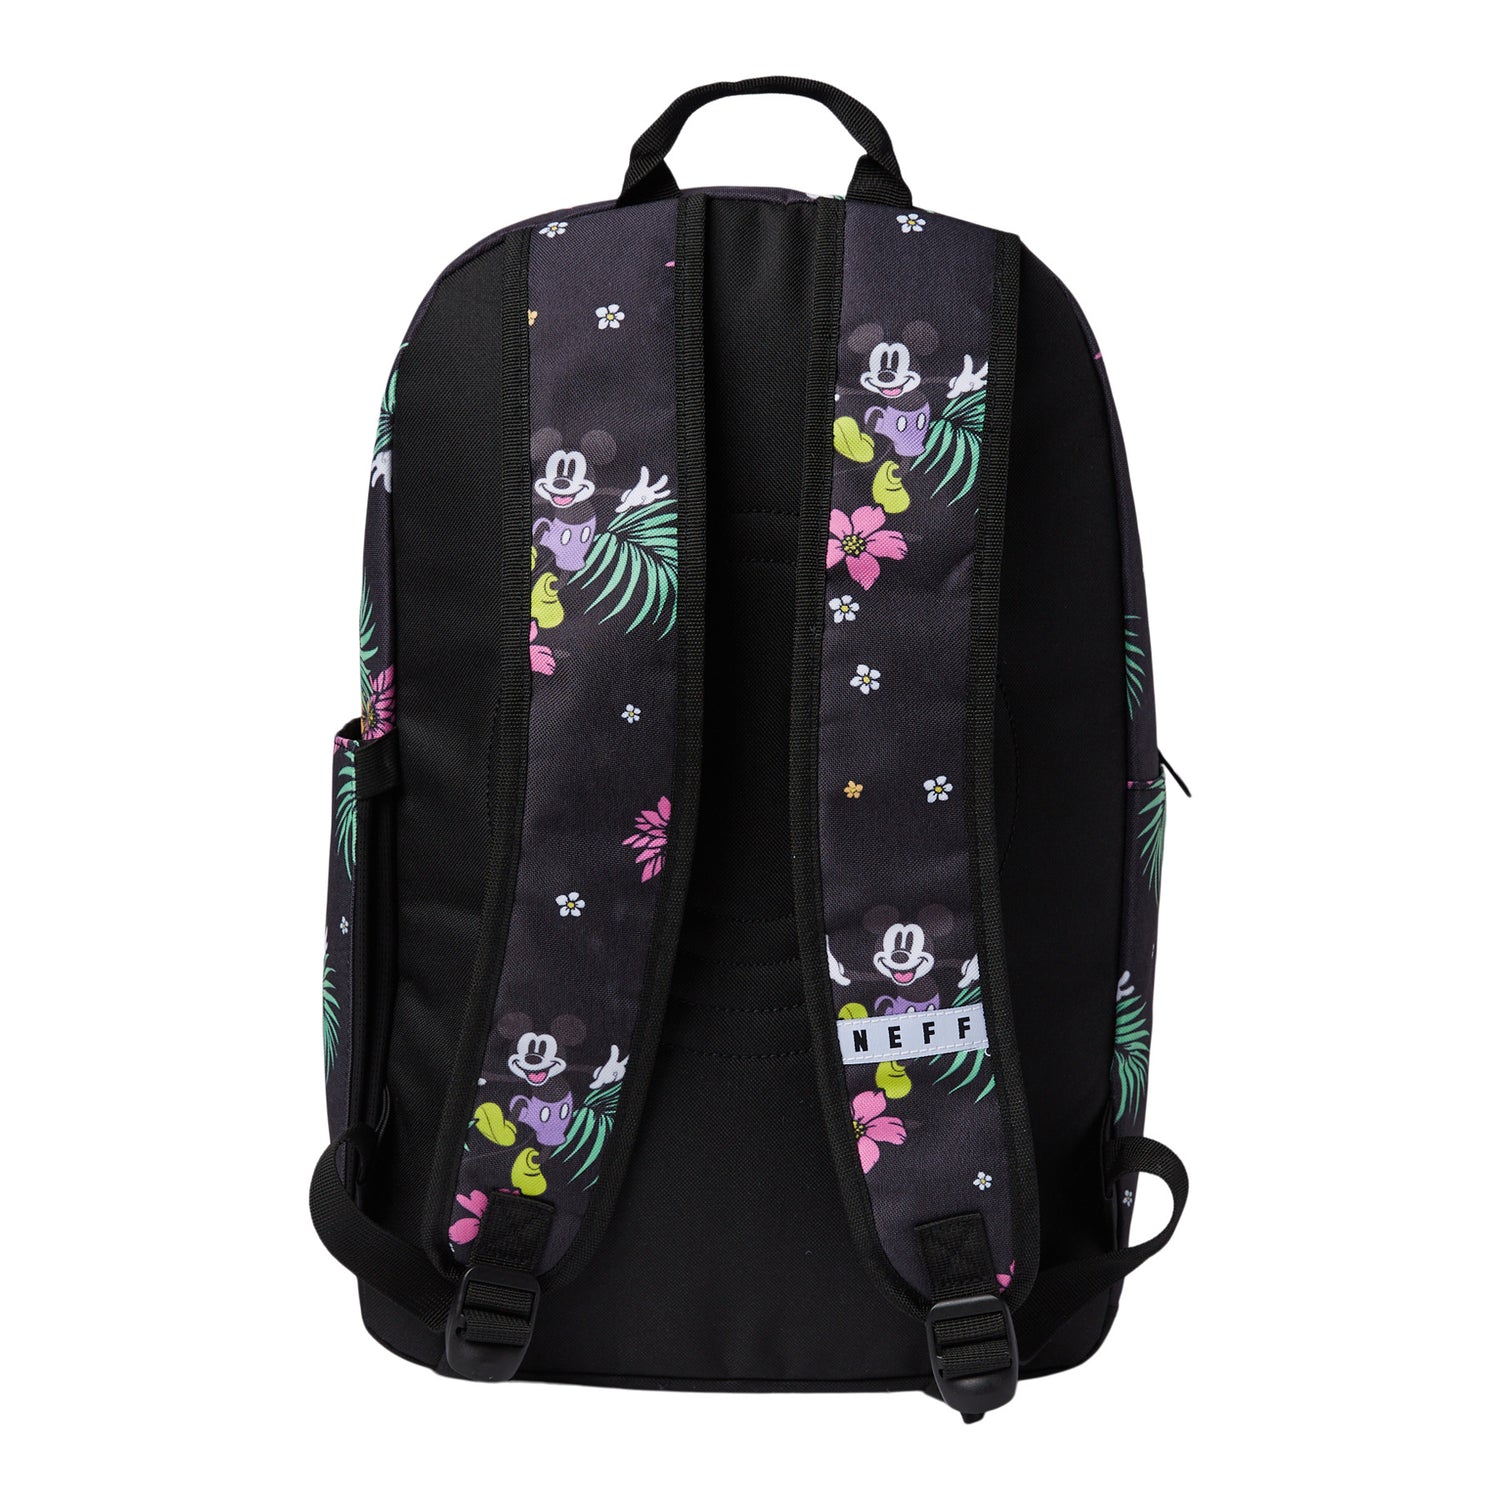 MICKEY MOUSE PALM BACKPACK - BLACK